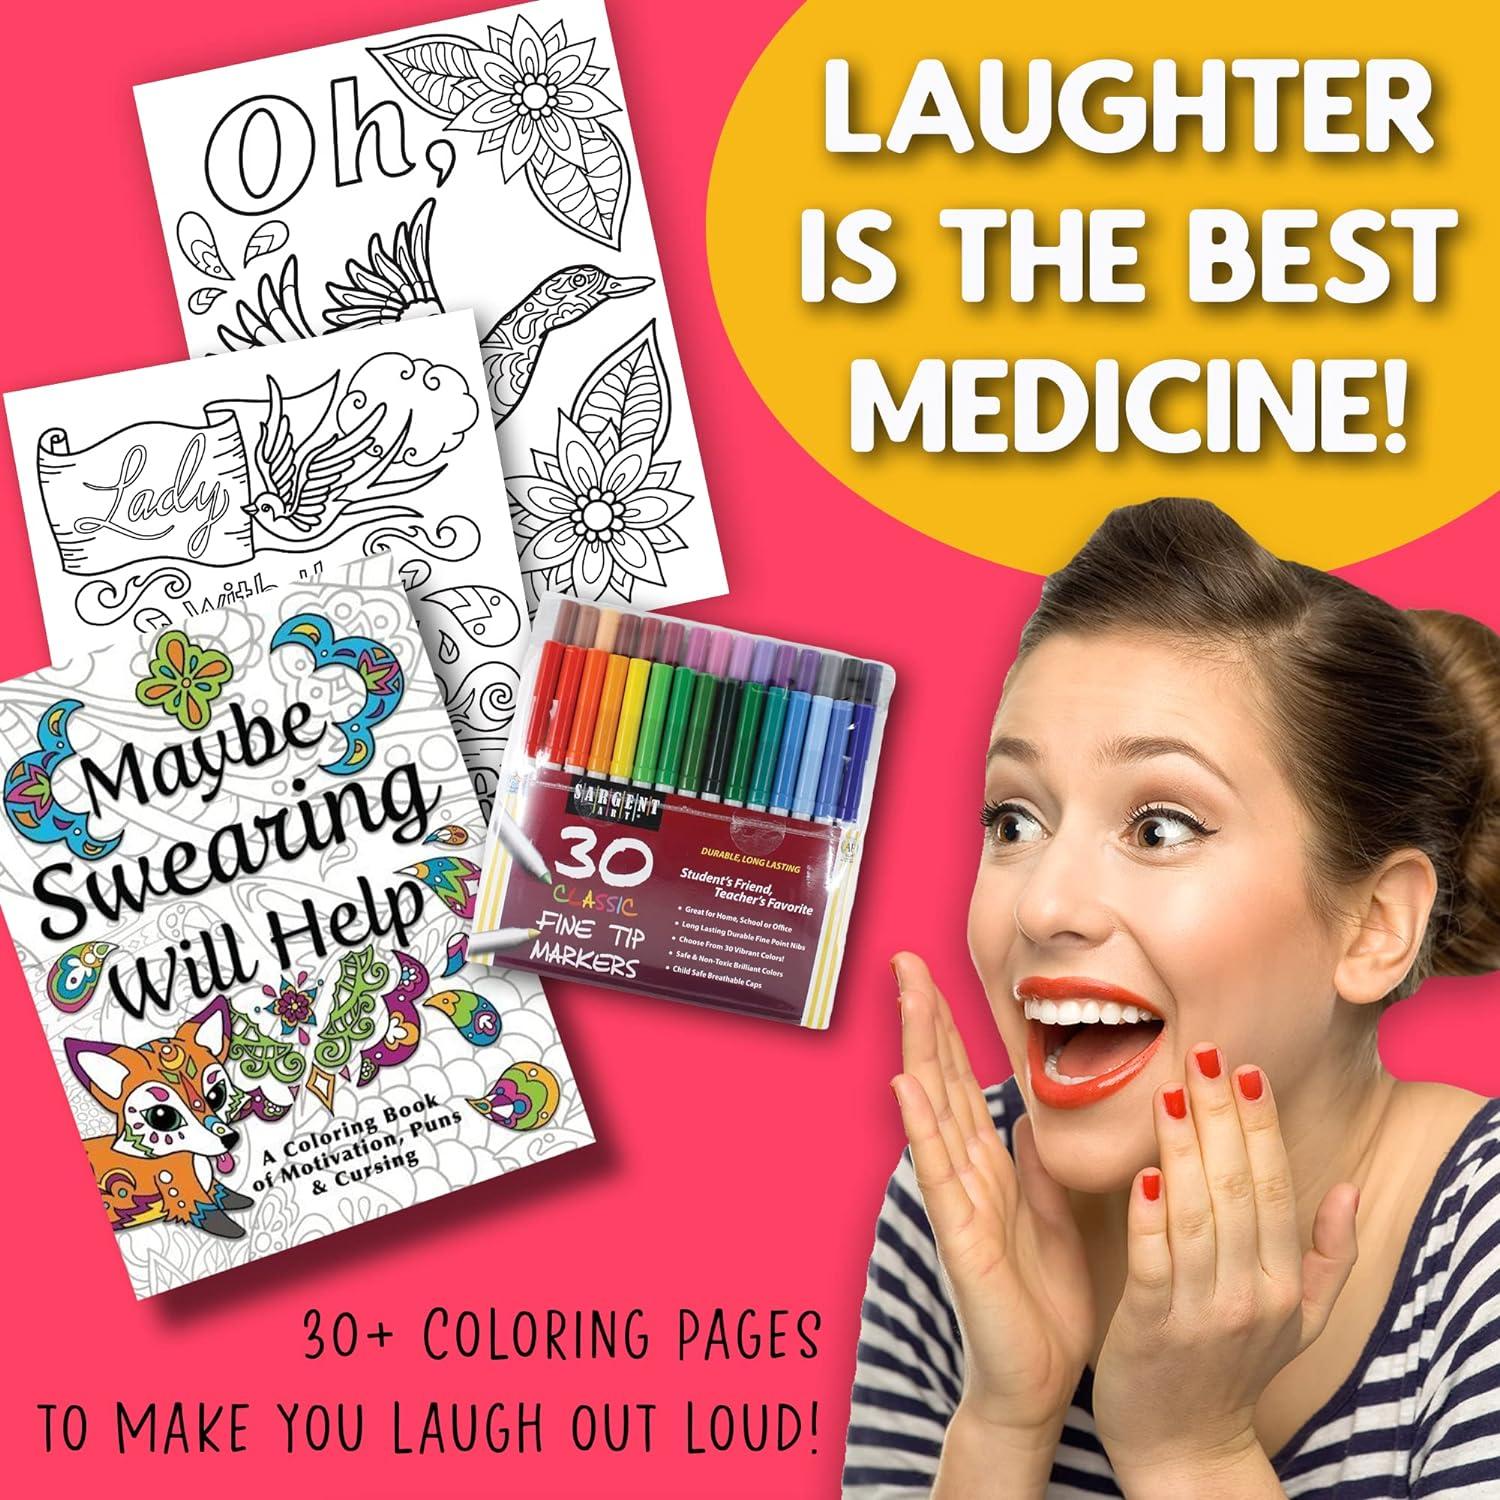 Anxiety Coloring Book for Women: Self Care Coloring Book with a Positive and Good Vibe Designs for Women & Girls [Book]